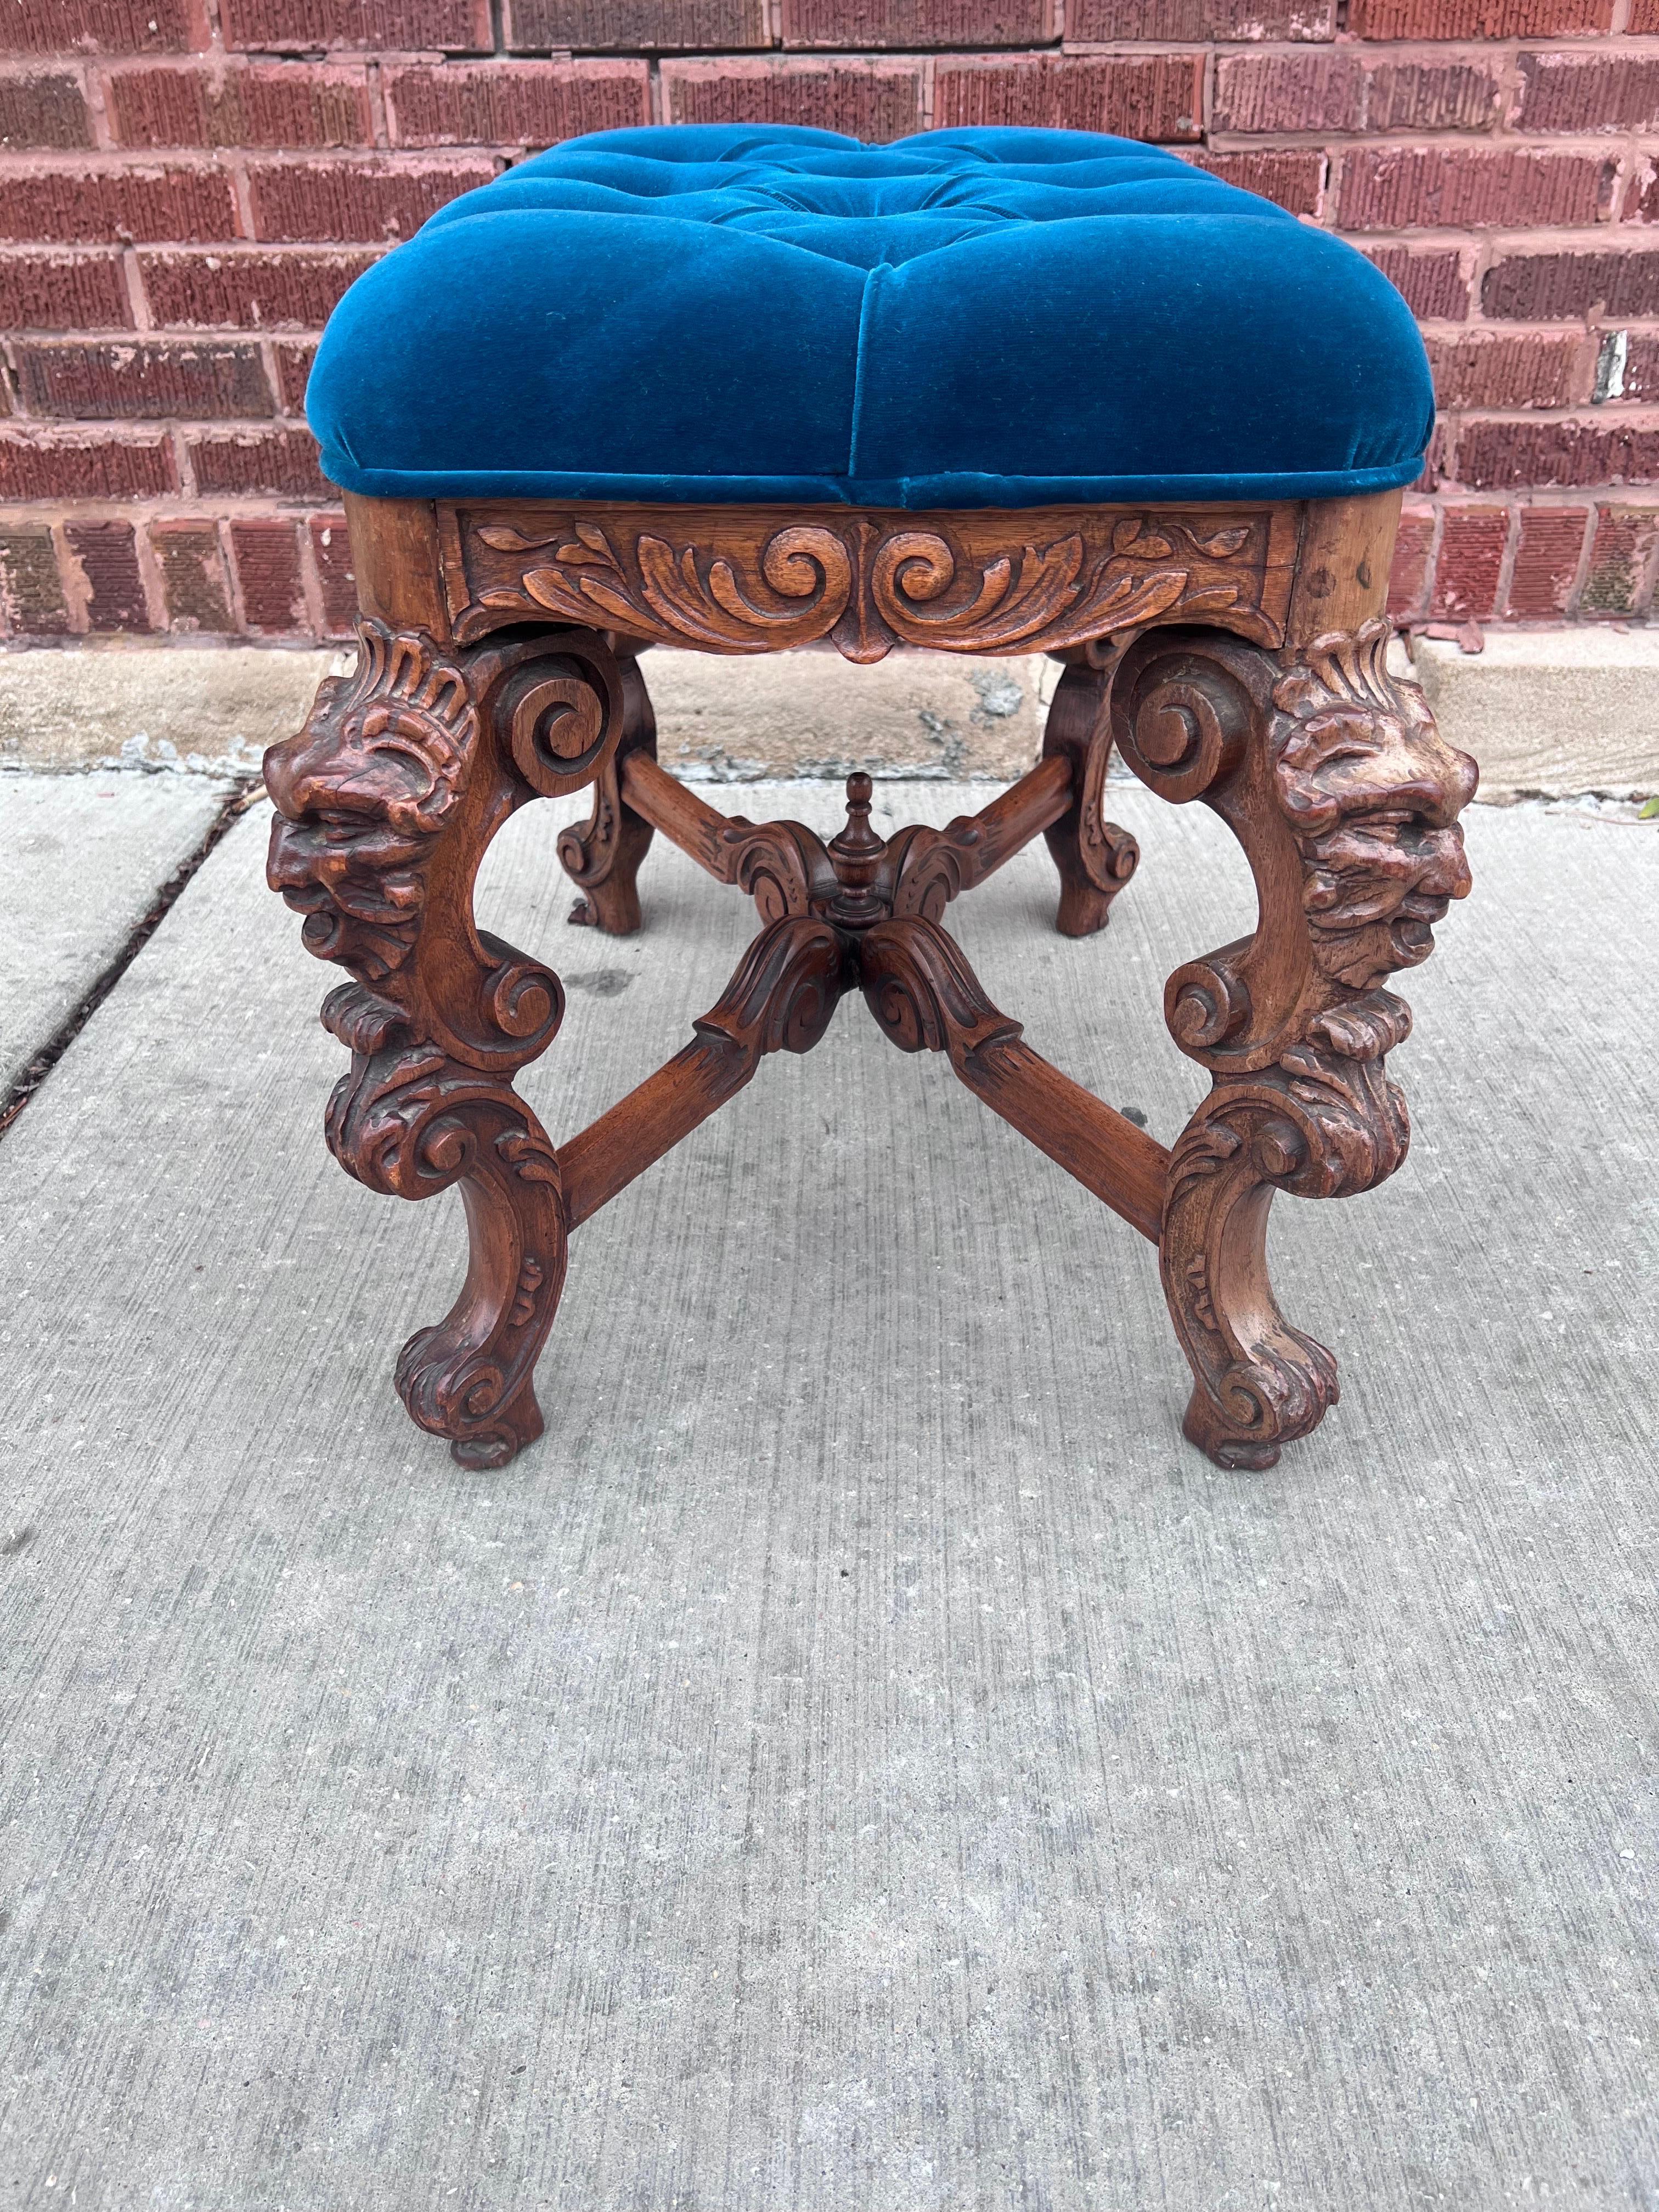 Hand-Crafted Antique Gothic Griffin Carved Ottoman Newly Upholstered in Blue Velvet